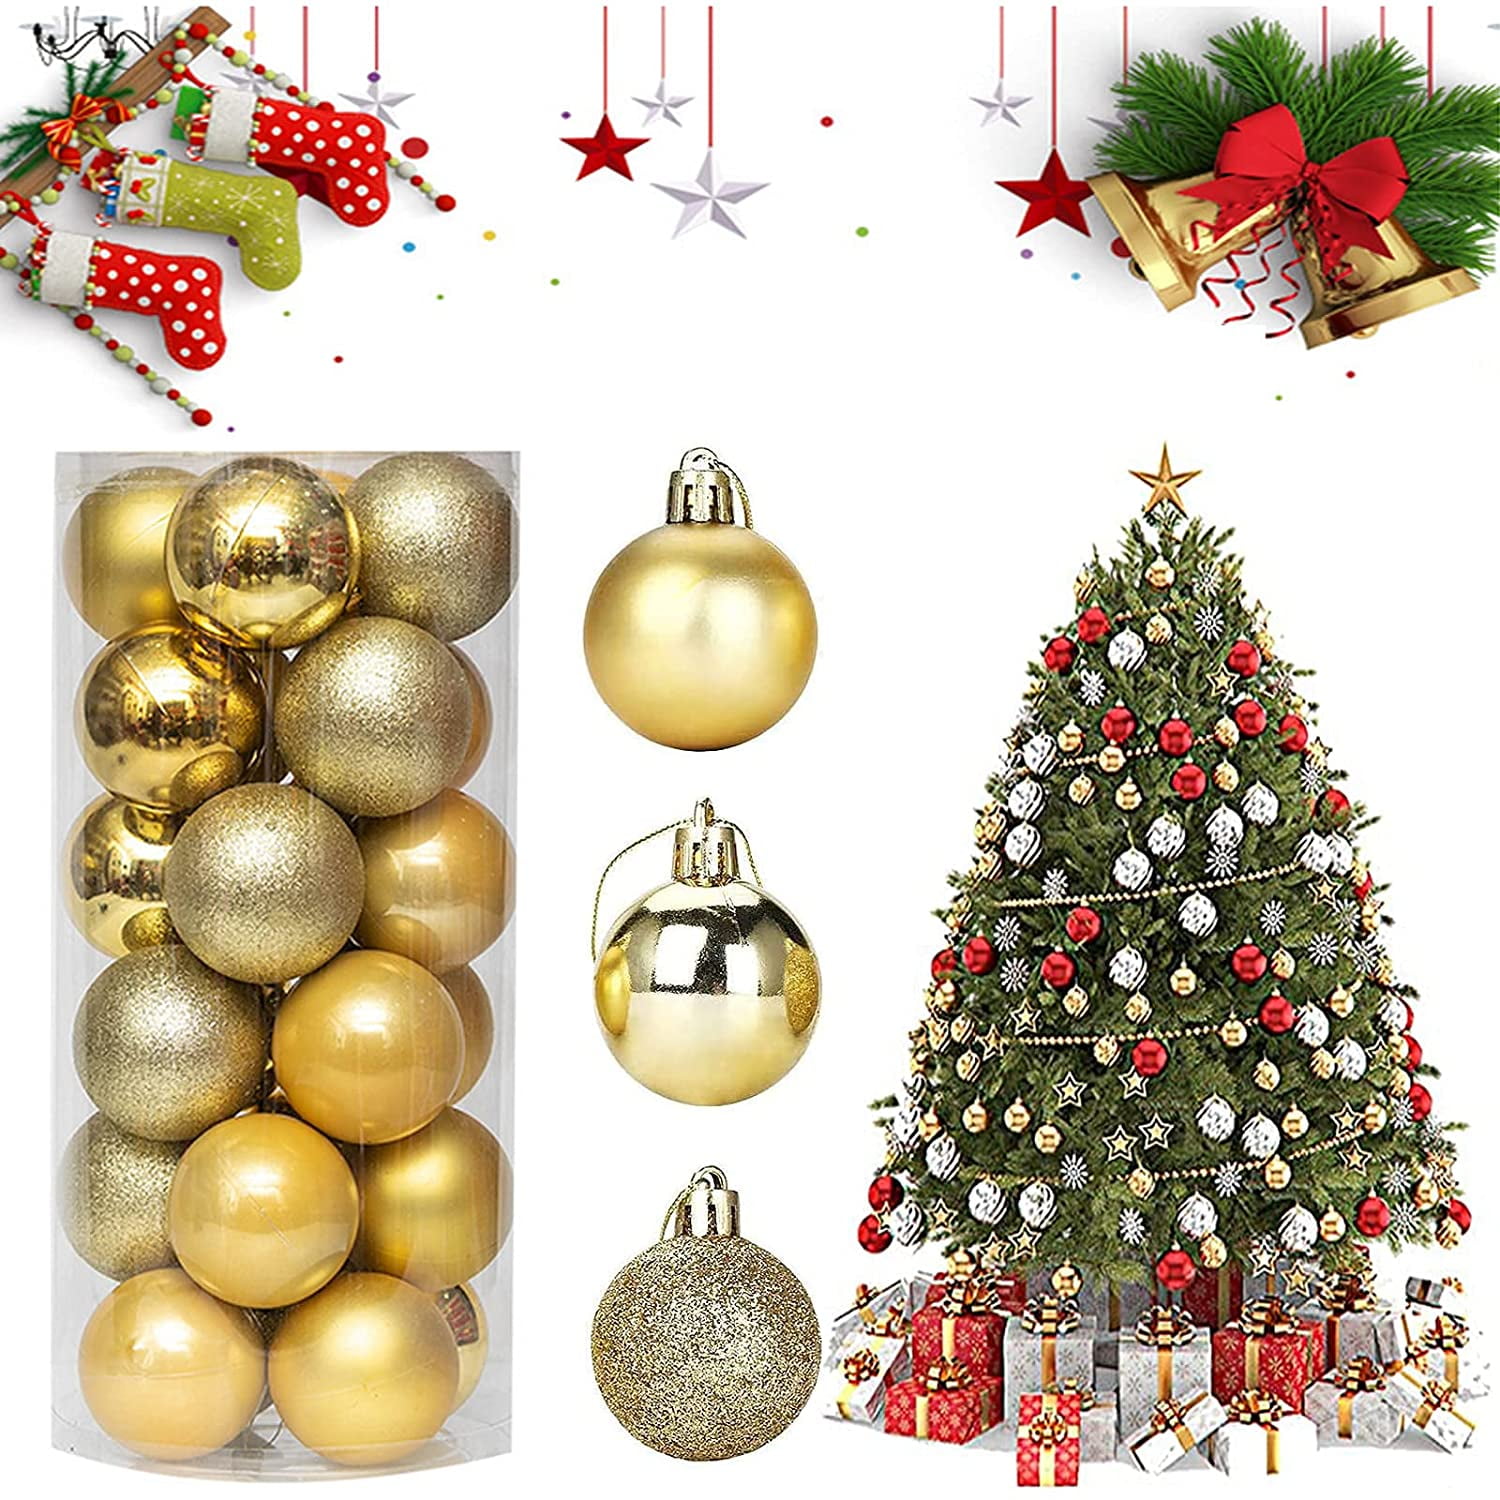 for Holiday Party Decor Golden Shatterproof Christmas Tree Decorations Decorative Hanging Balls Ornaments Baubles LessMo 30PCS Golden Christmas Balls Ornament for Xmas Tree